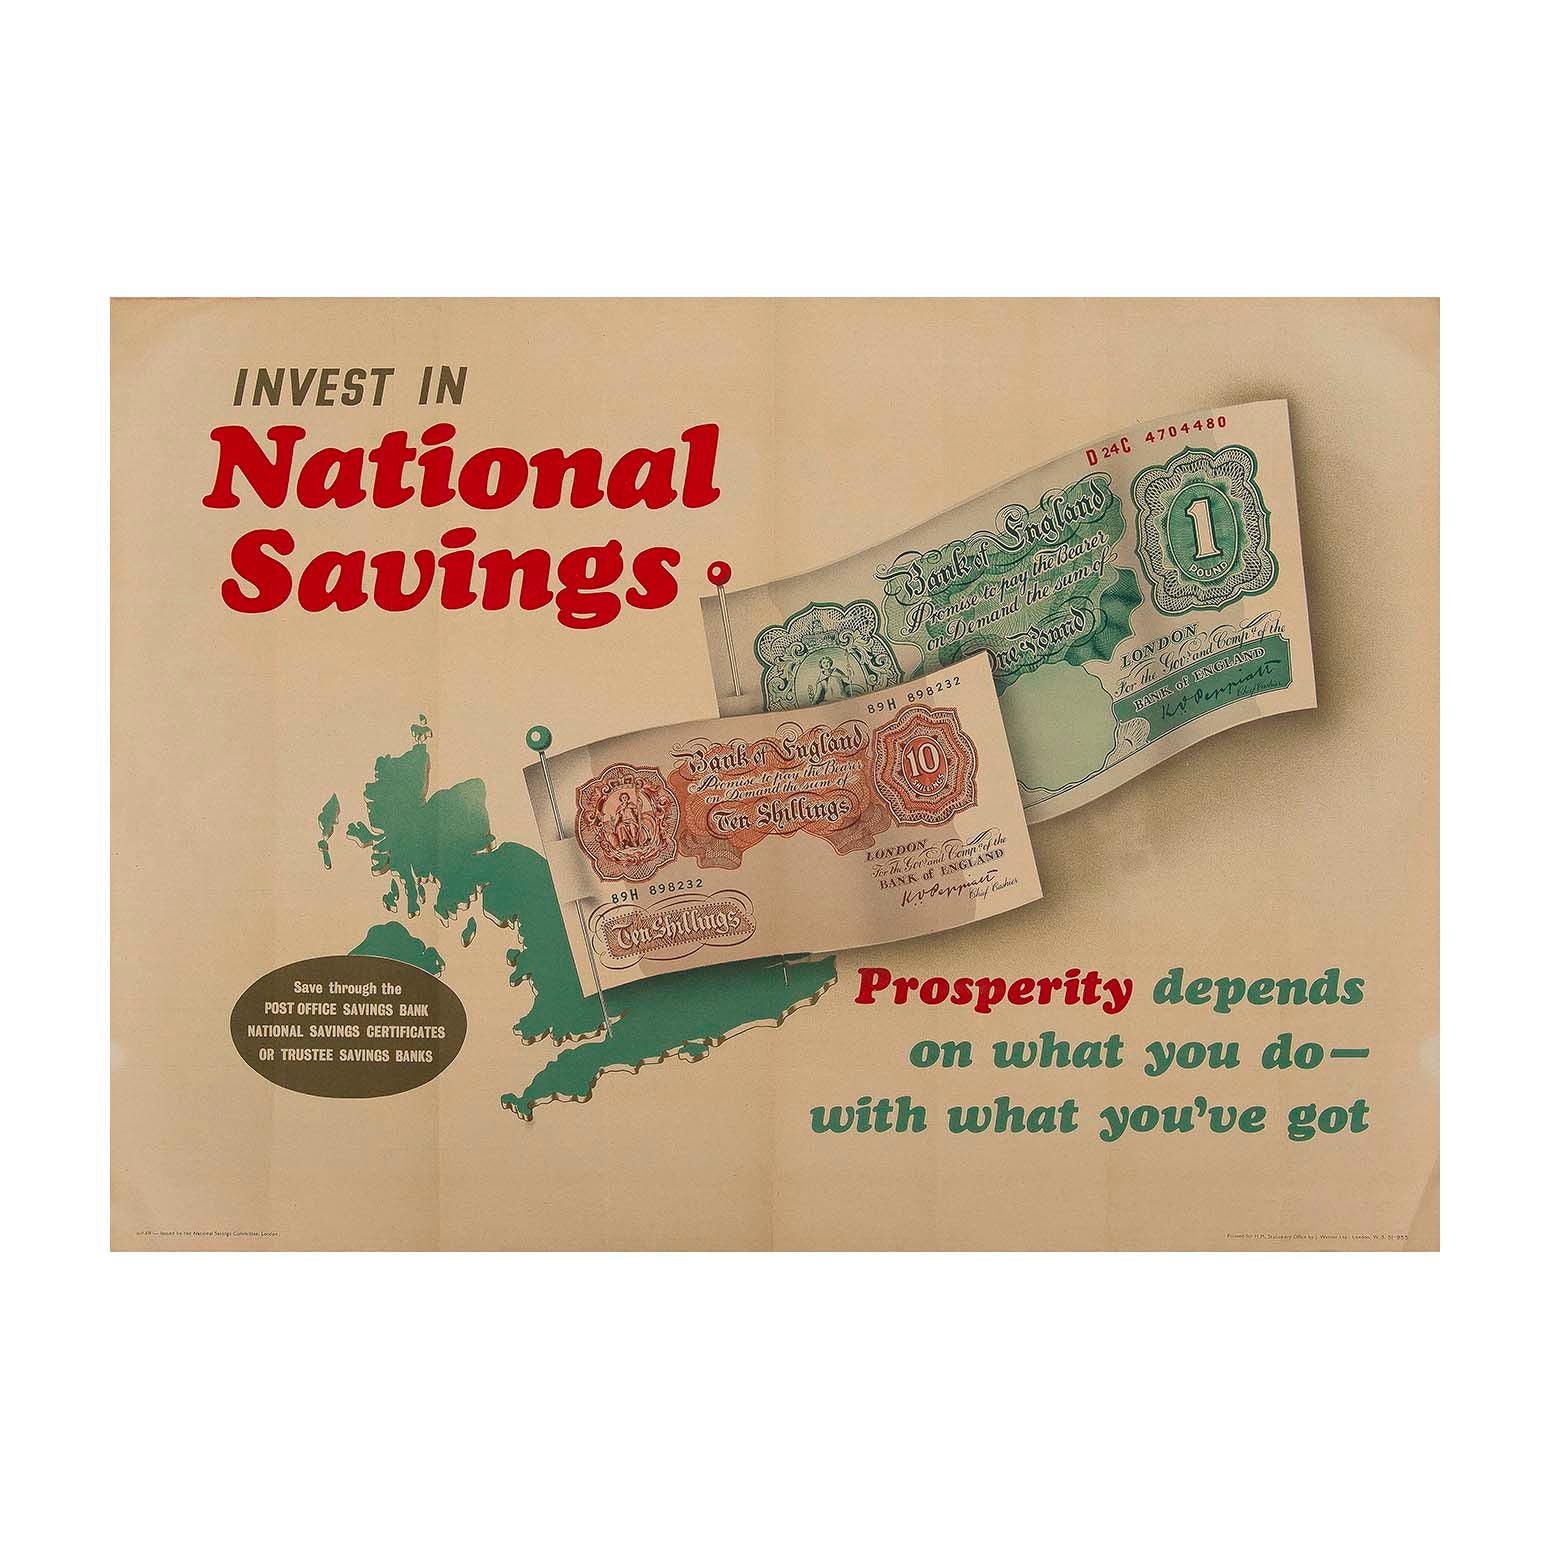 Invest in National Savings, prosperity depends on what you do with what you've got